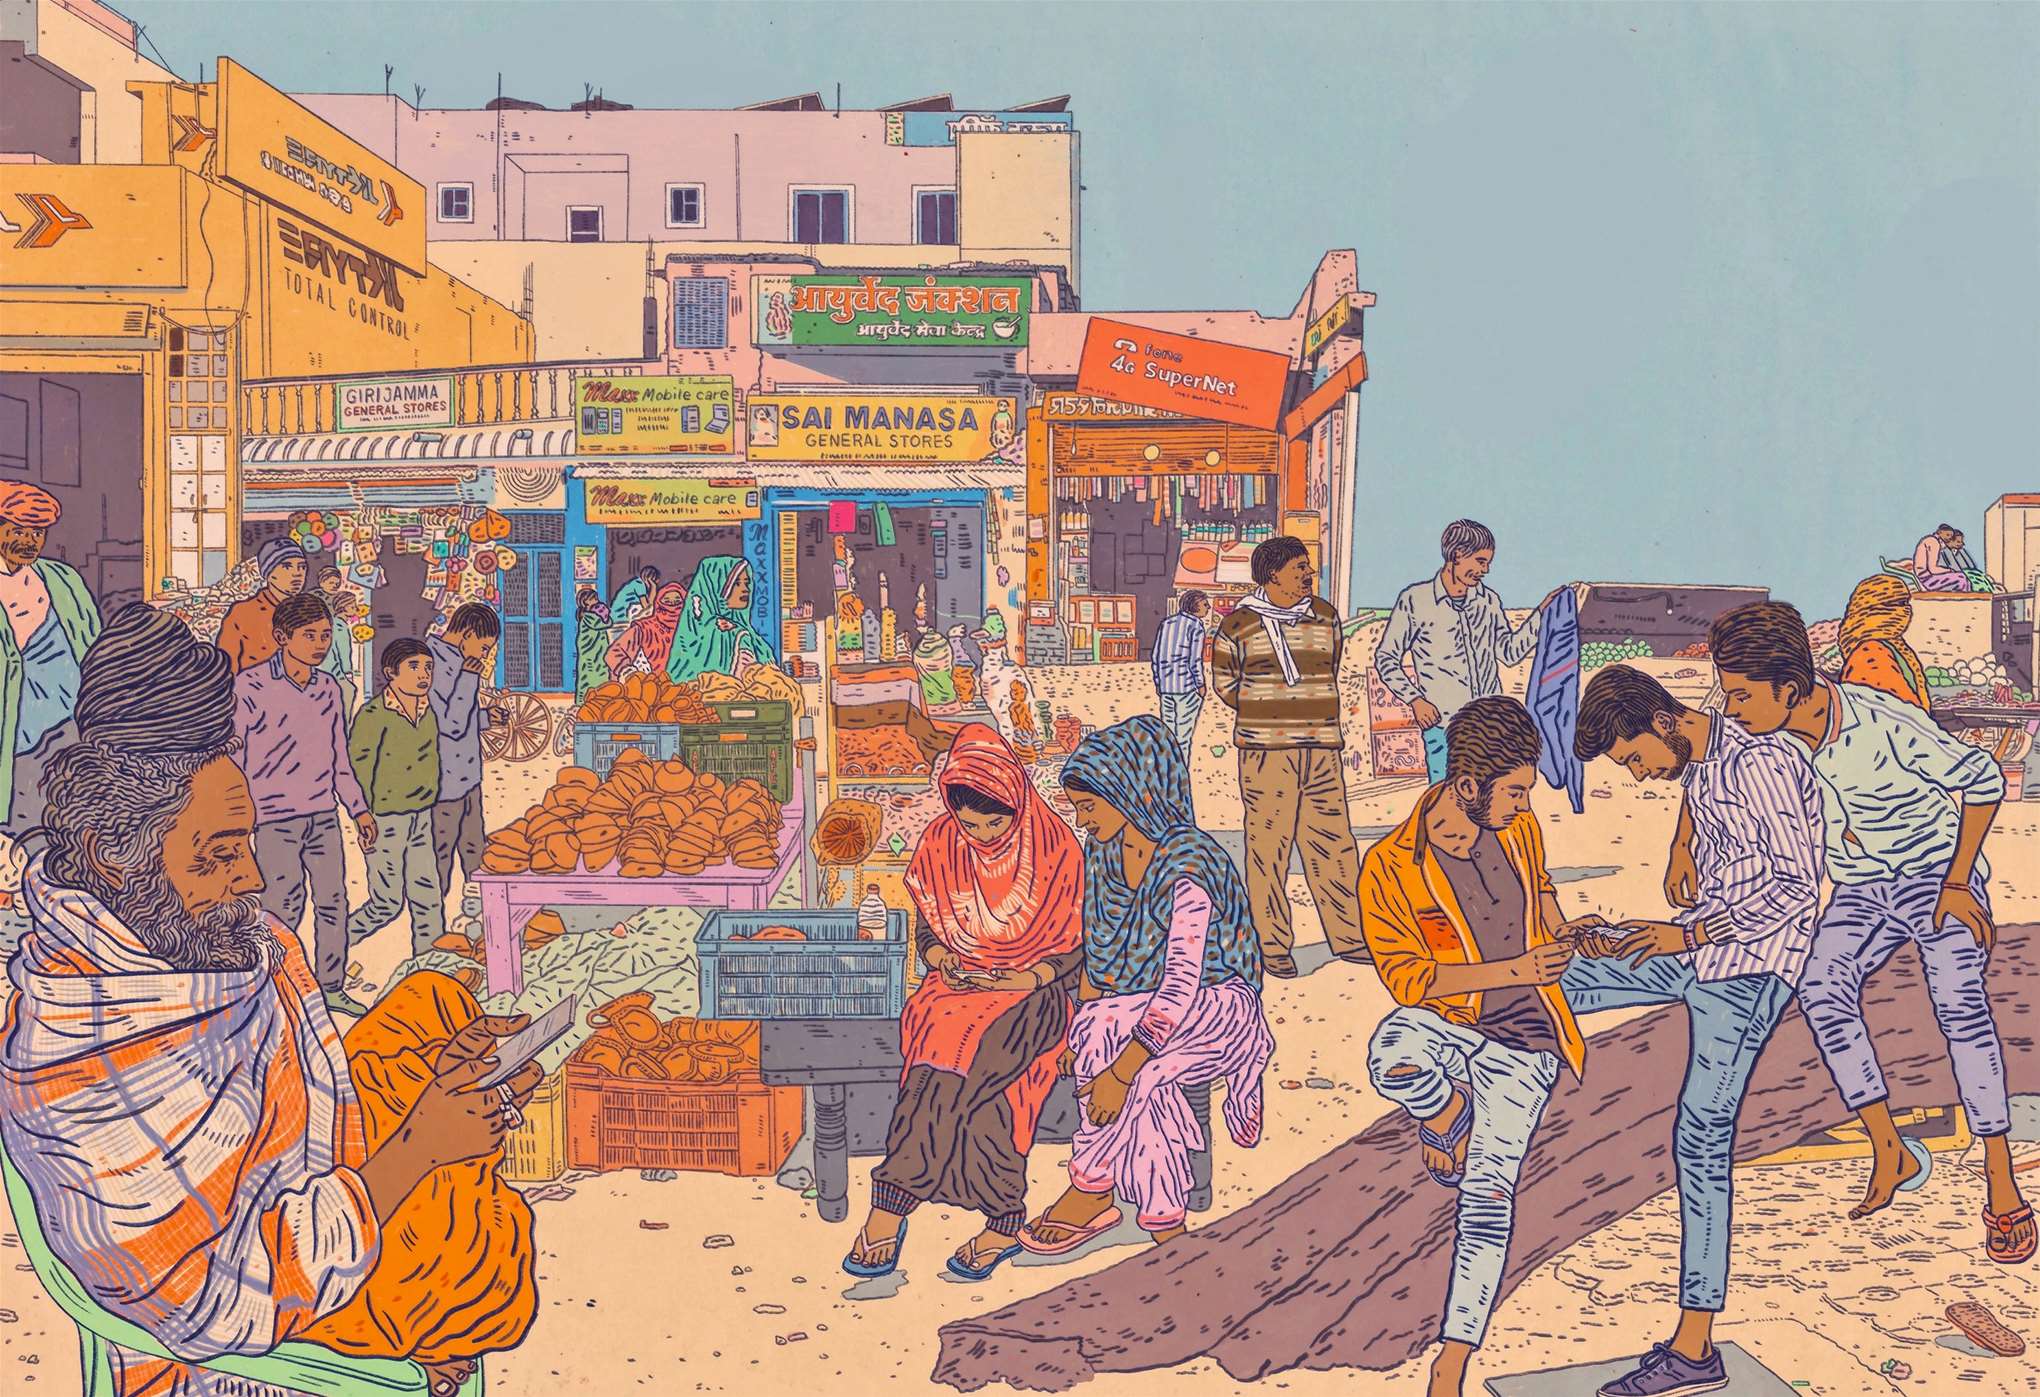 Anna Higgie, Detailed illustration of a market scene in India, exploring rise of use of mobile phones. Editorial illustration for Trust Magazine. 